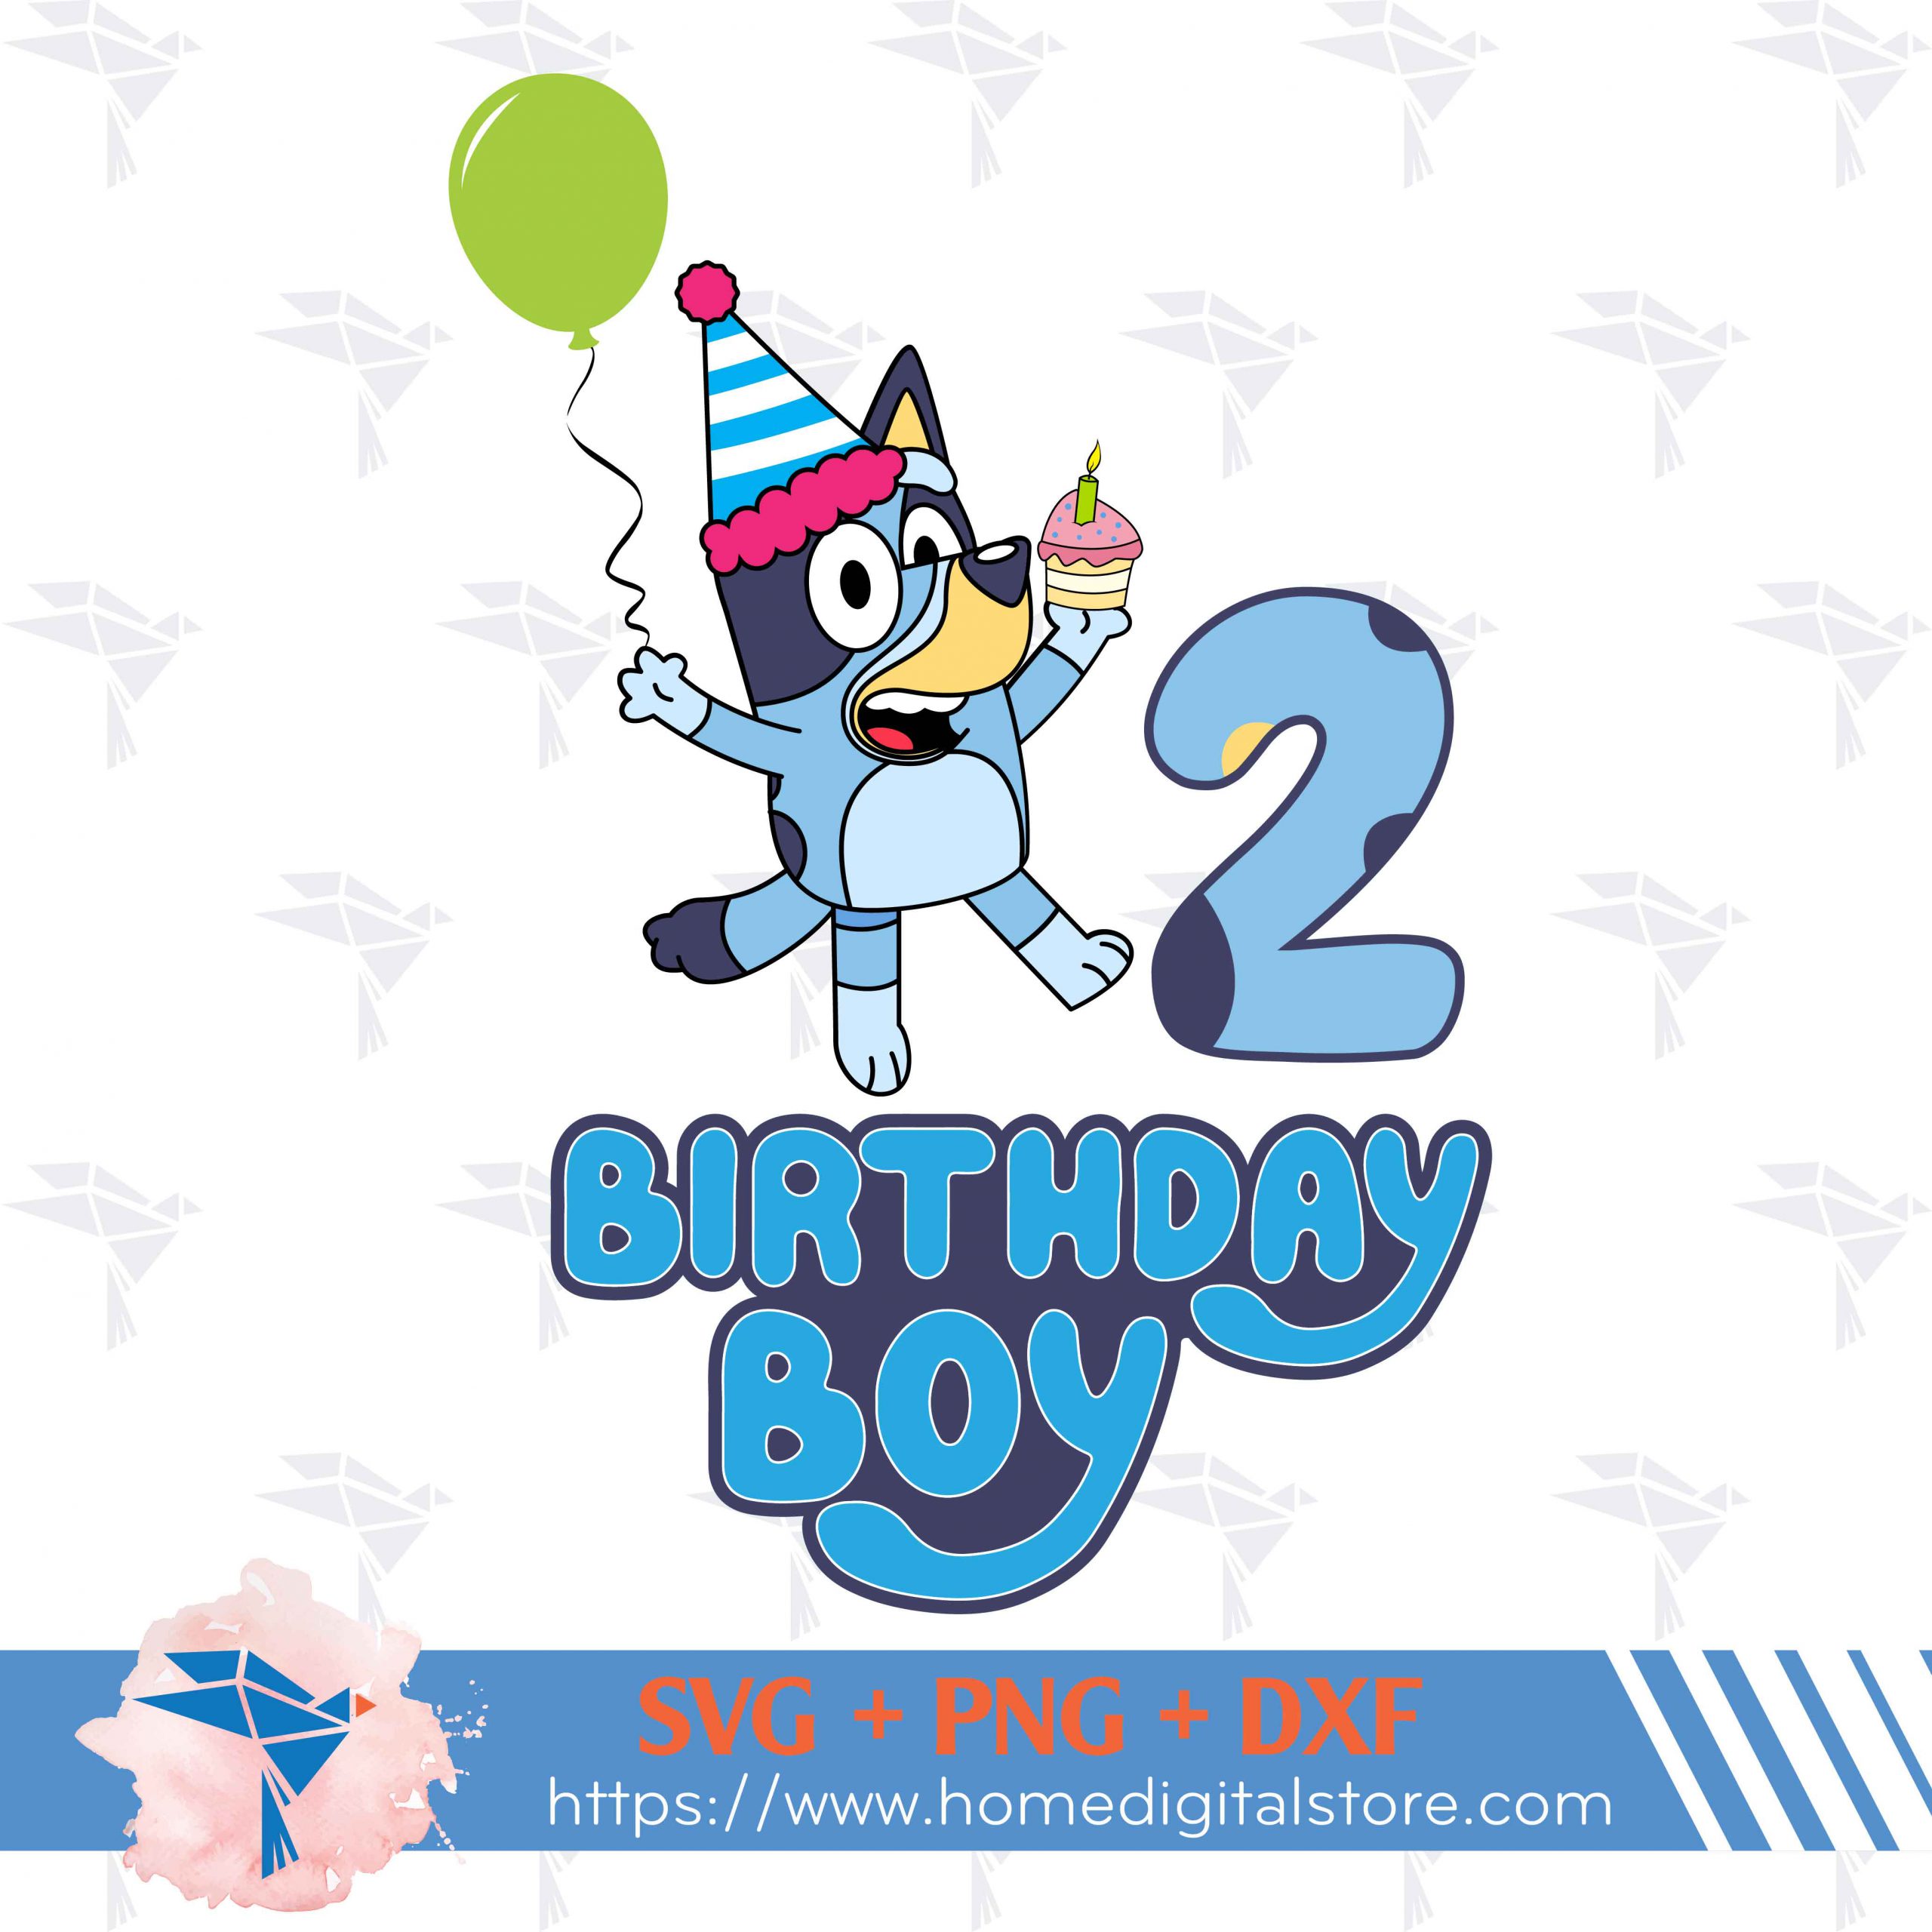 Happy Birthday Bluey SVG, PNG, DXF. Instant download files for Cricut  Design Space, Silhouette, Cutting, Printing, or more